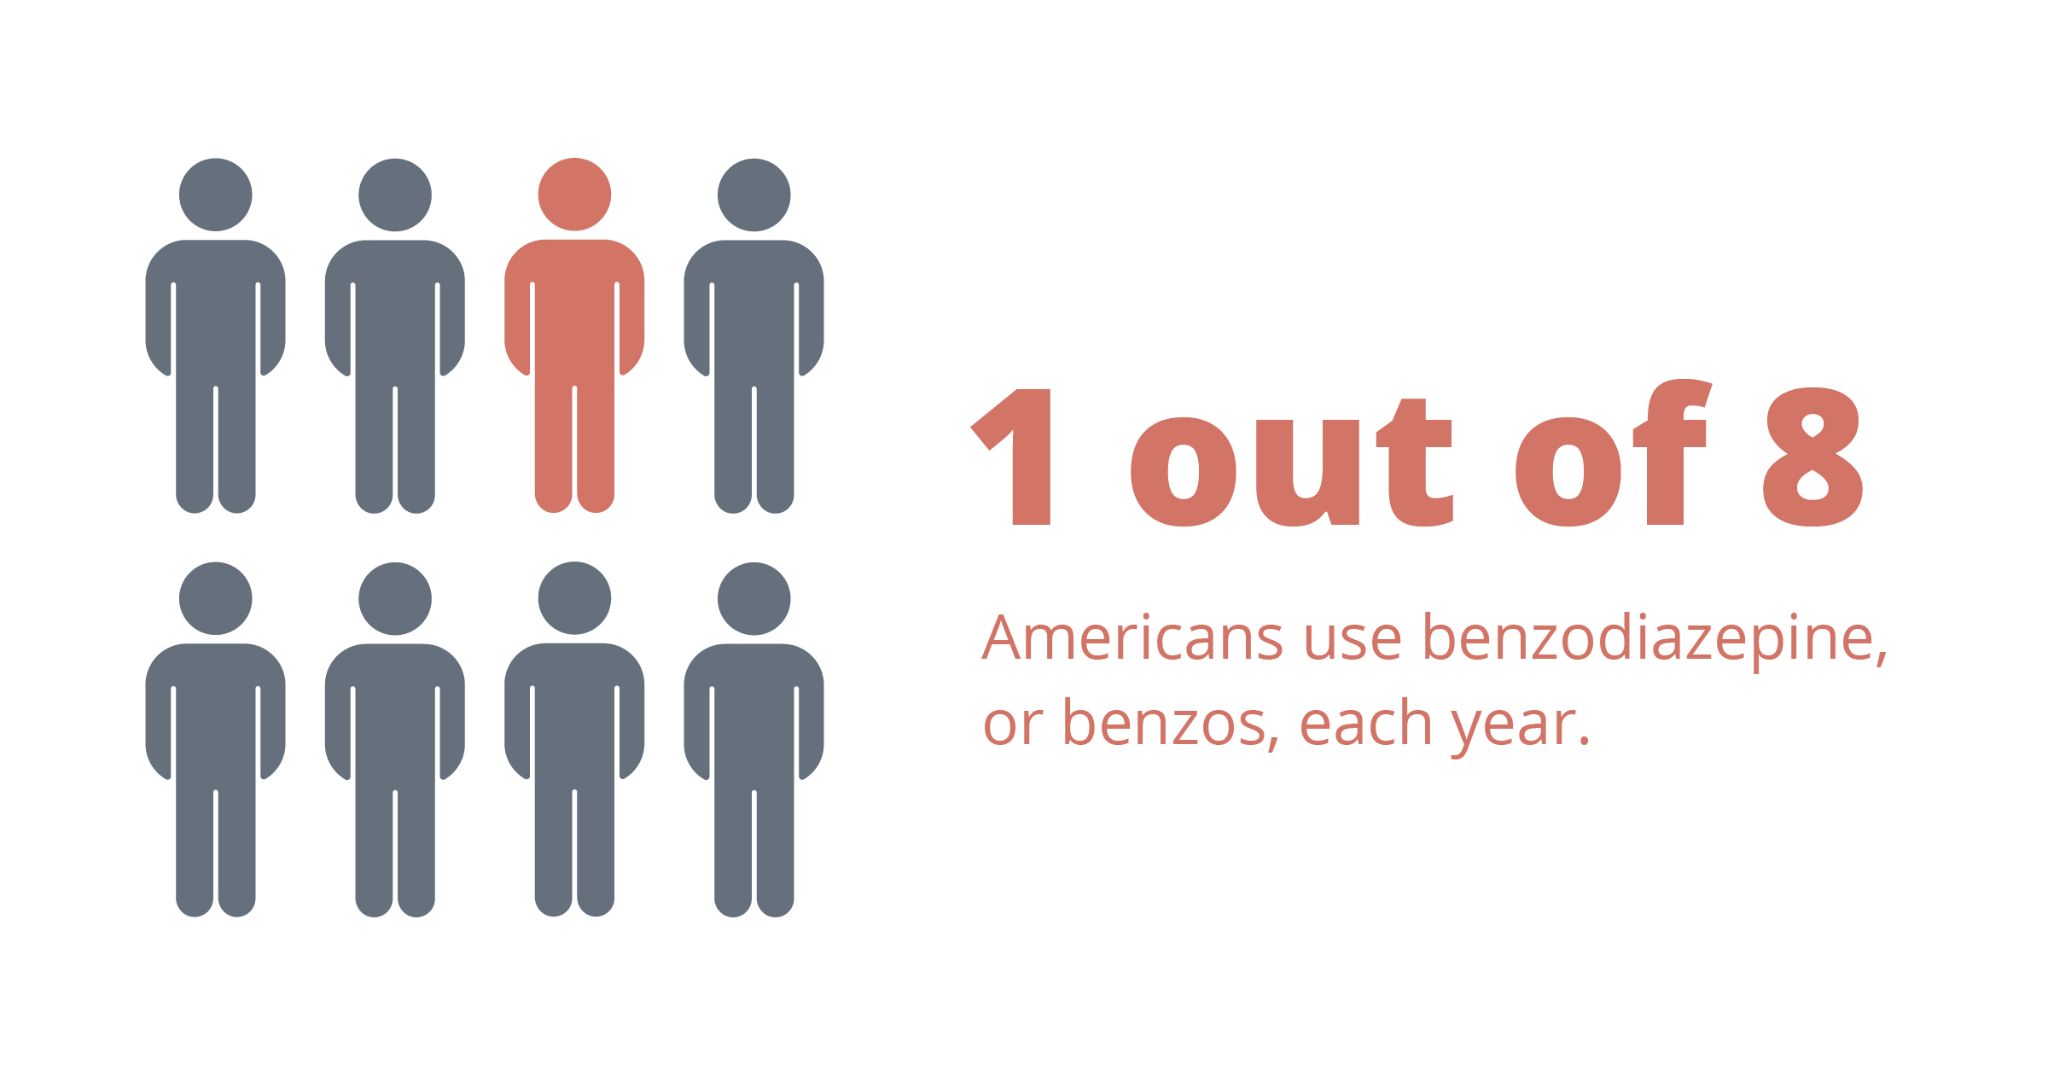 1 out of 8 americans use benzodiazepine, or benzos, each year.